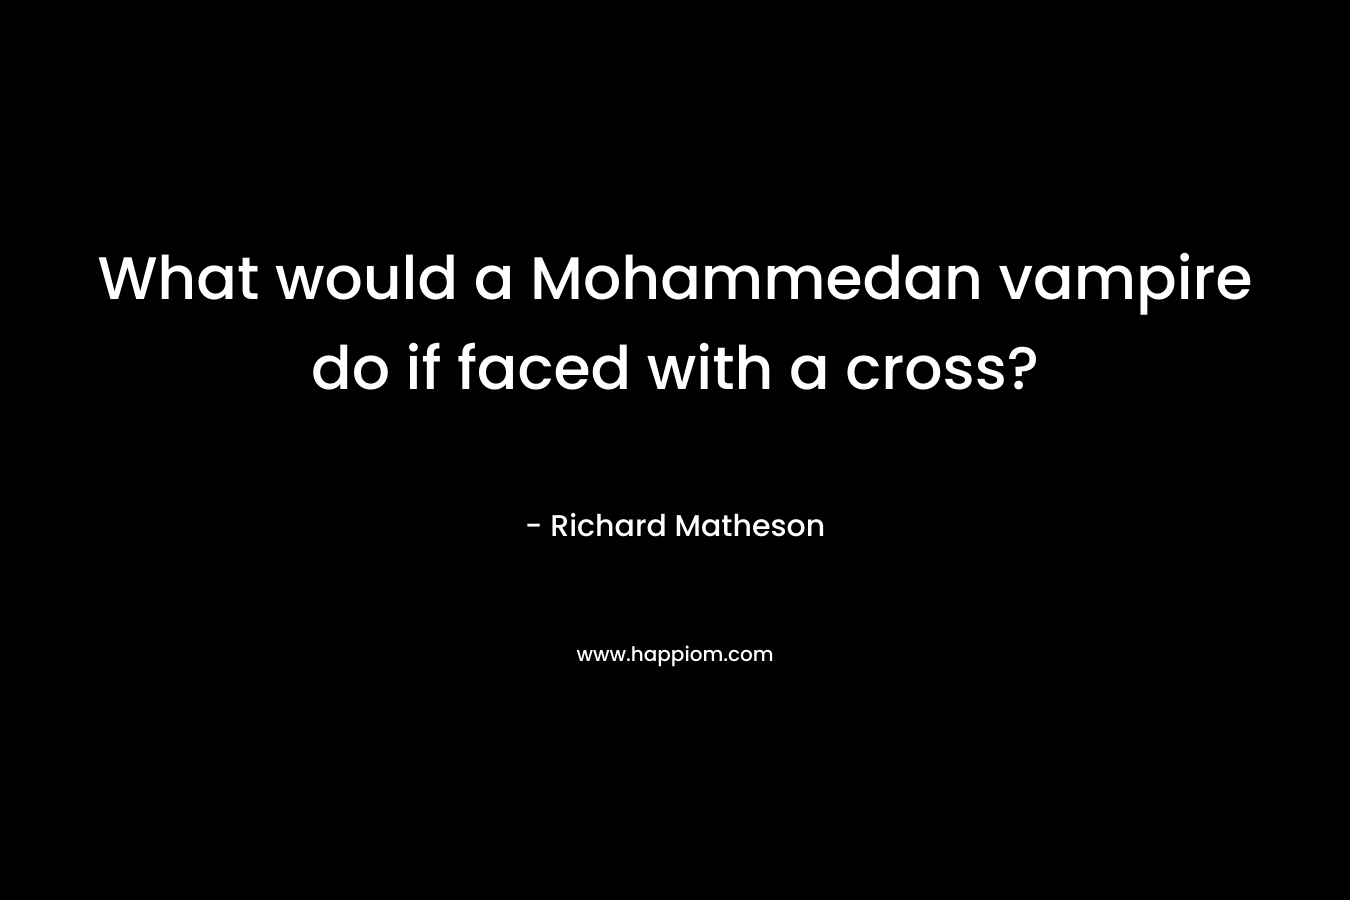 What would a Mohammedan vampire do if faced with a cross? – Richard Matheson